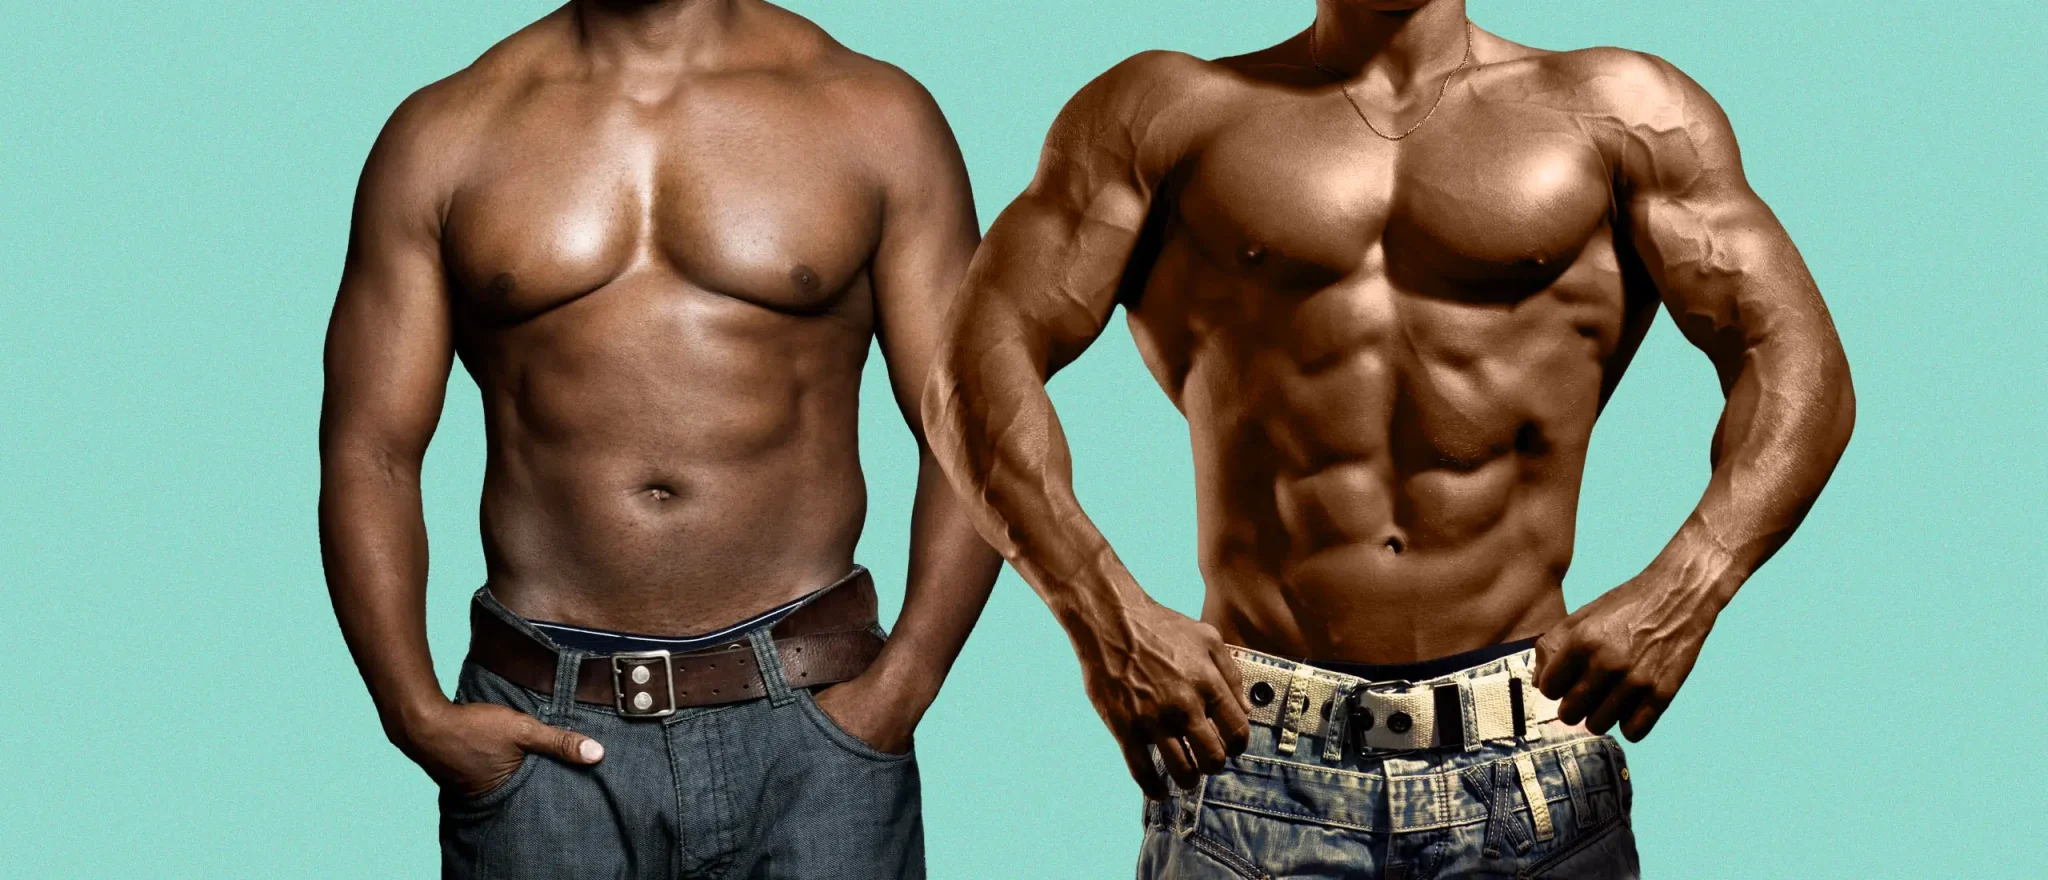 Bulking vs. Cutting: Everything You Need to Know About This Muscle-Building Strategy